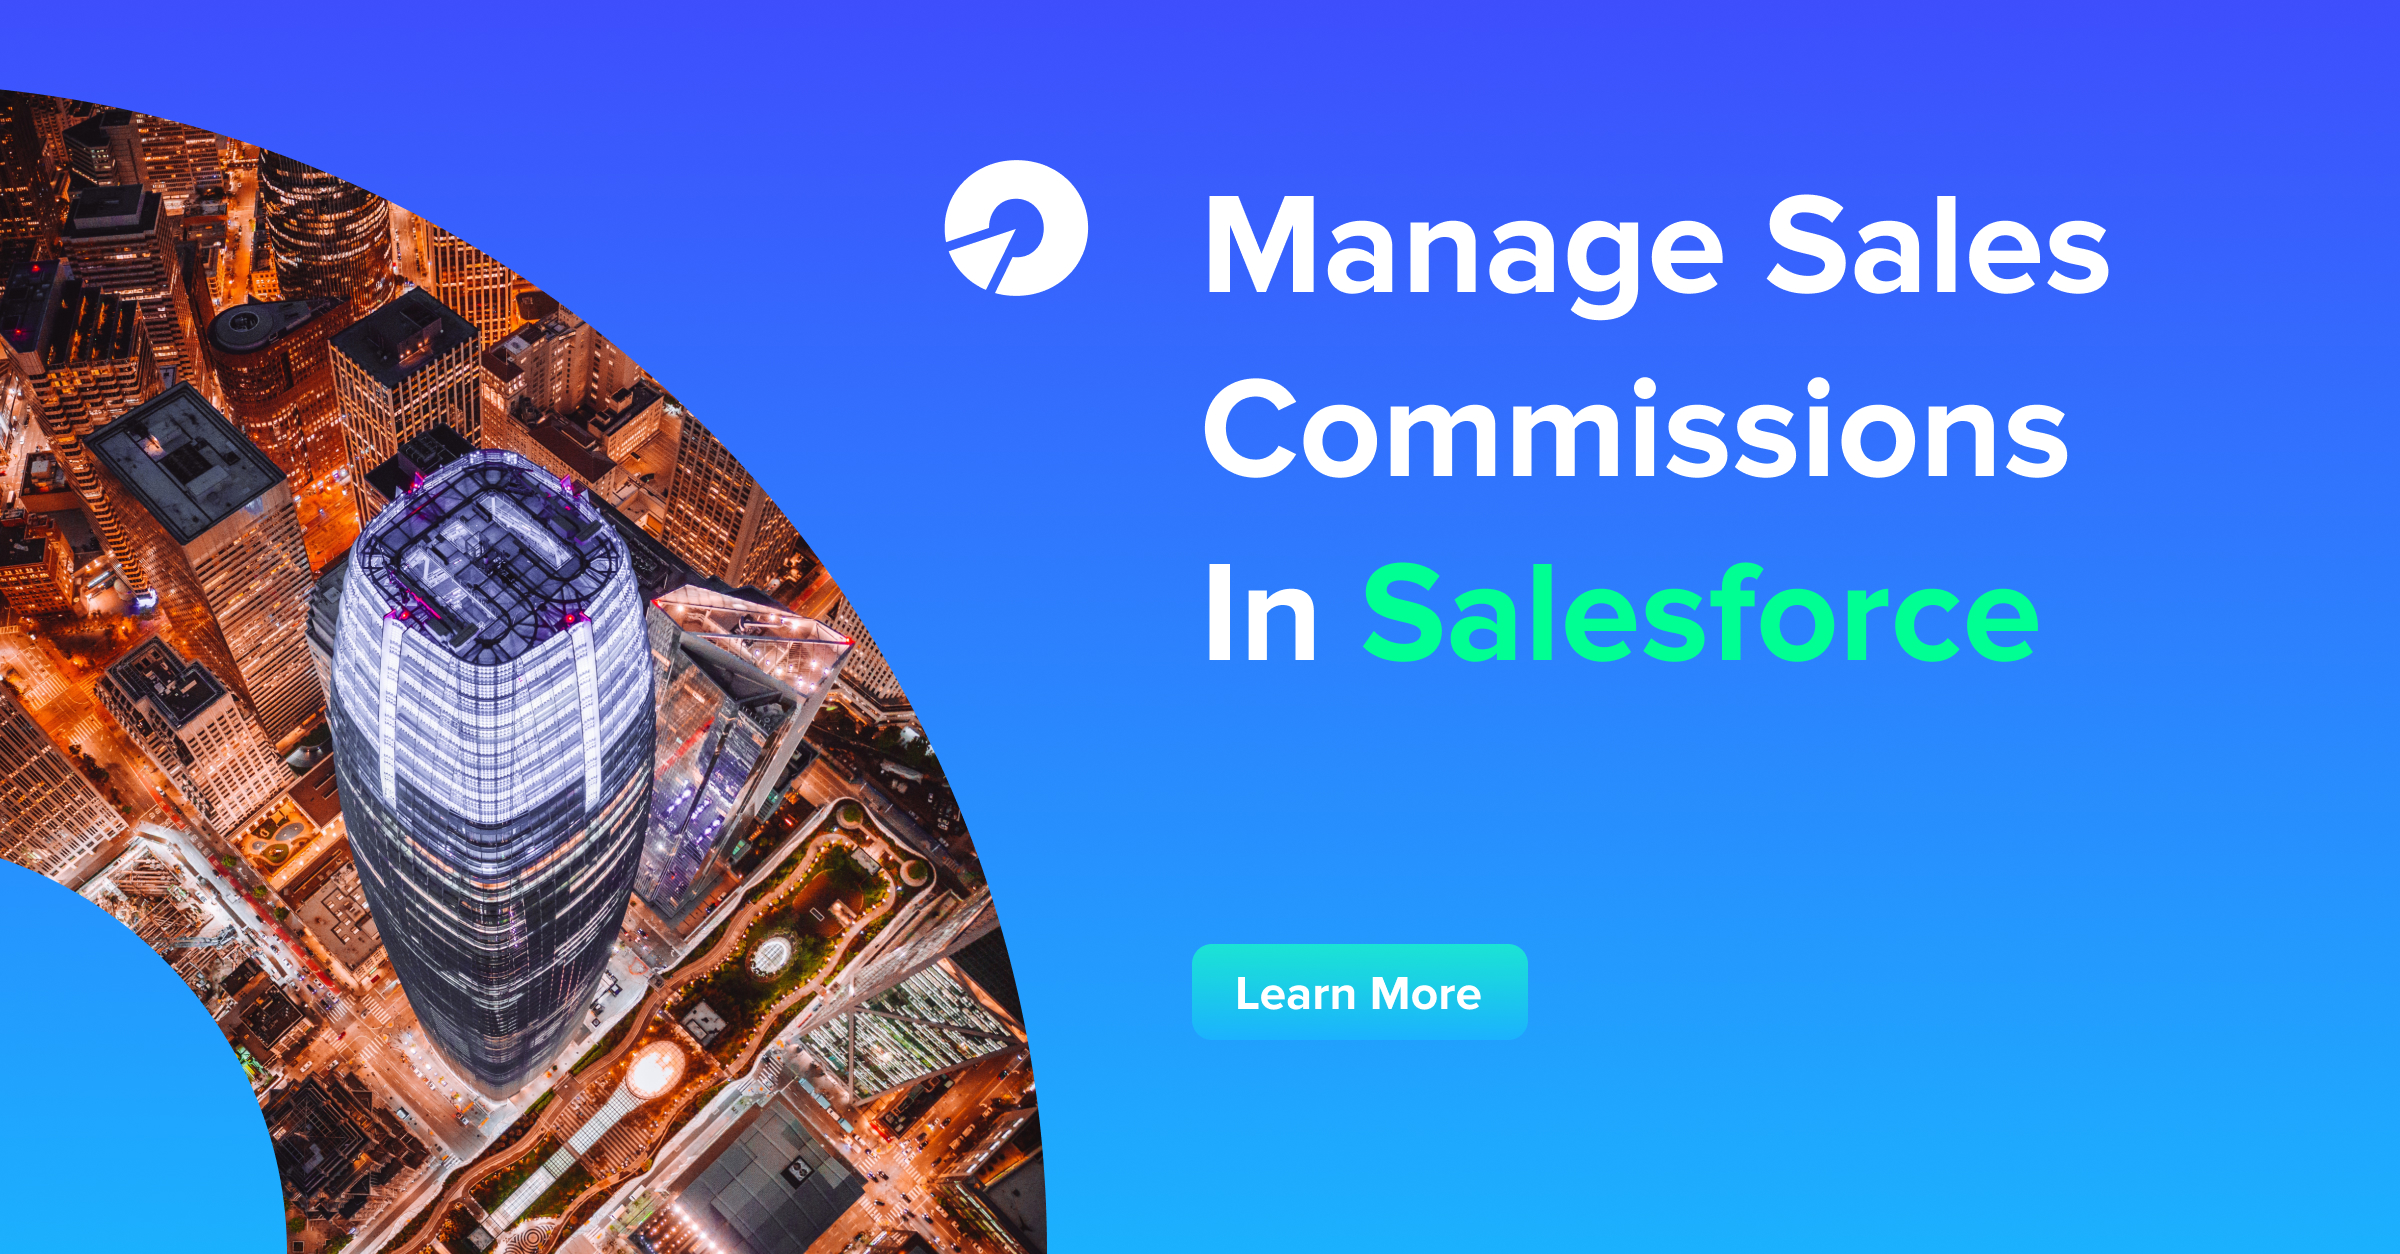 Manage Sales Commissions In Salesforce